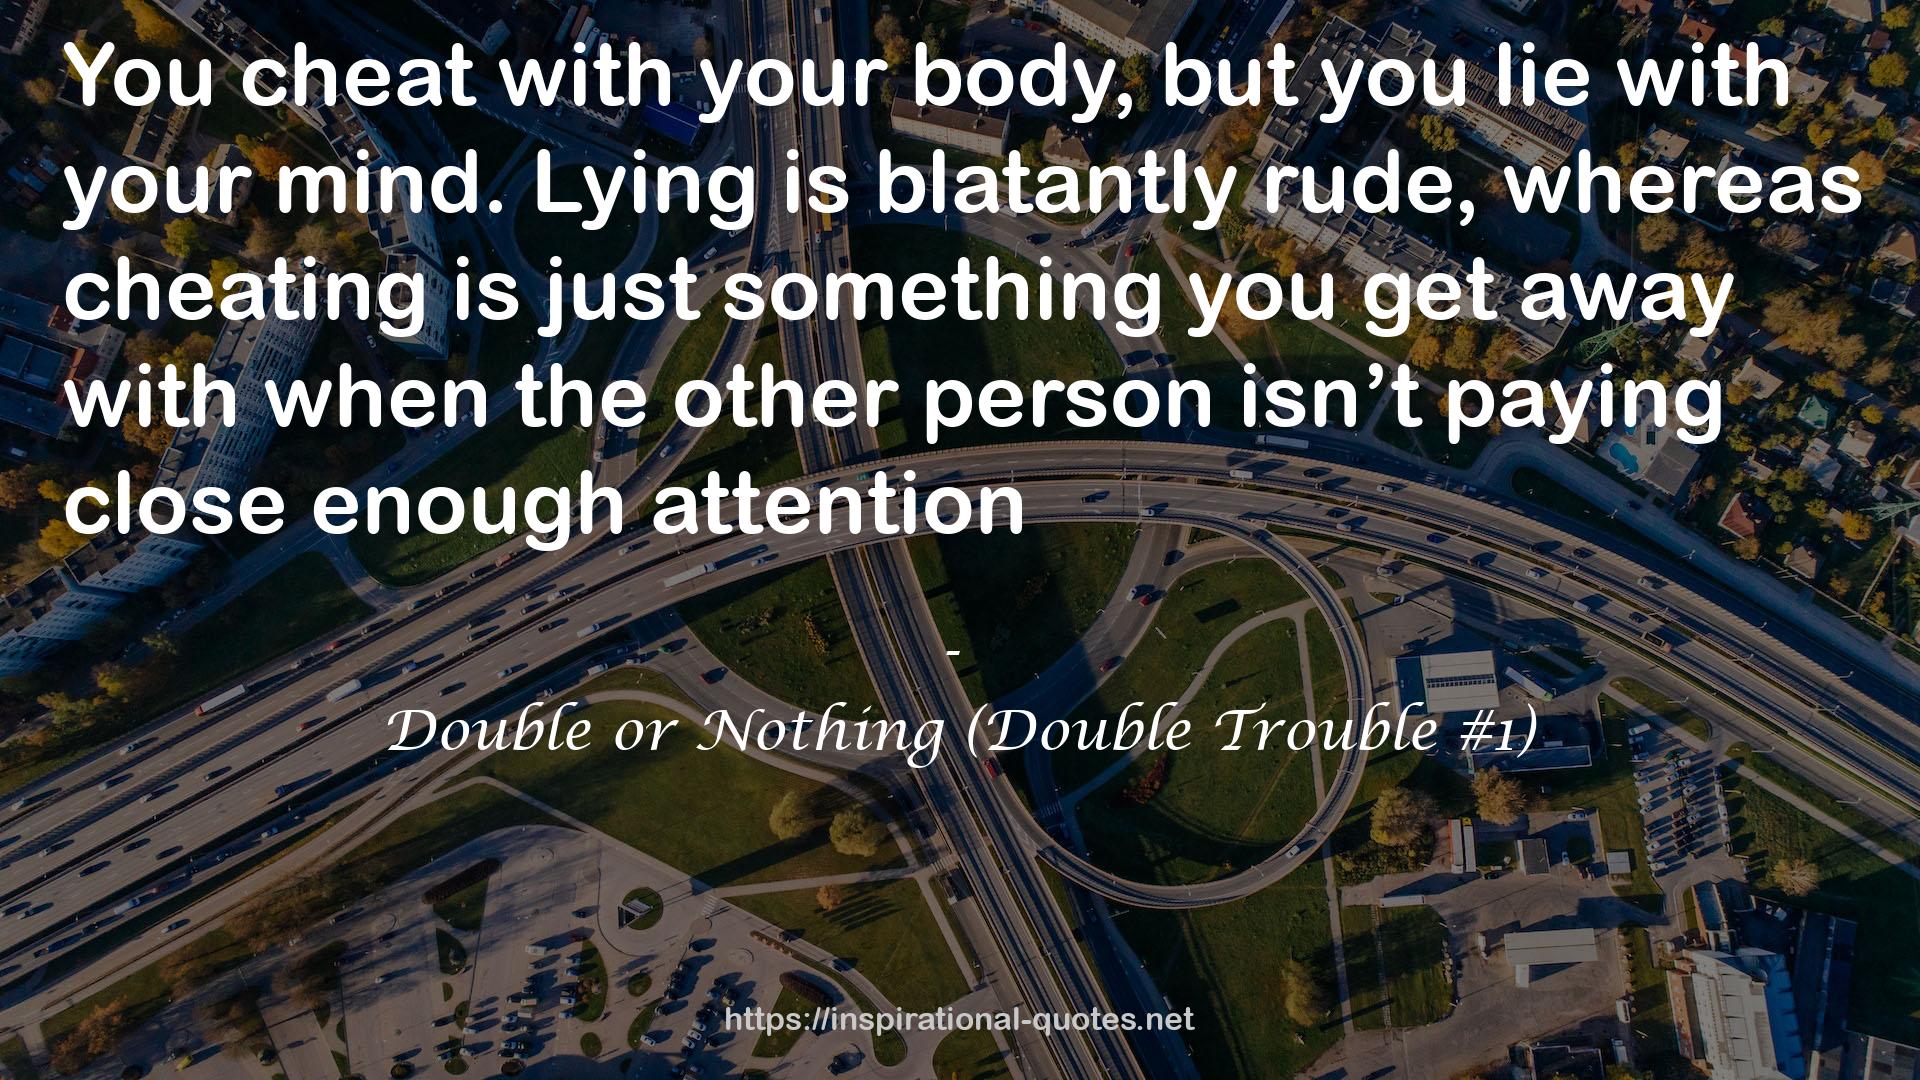 Double or Nothing (Double Trouble #1) QUOTES